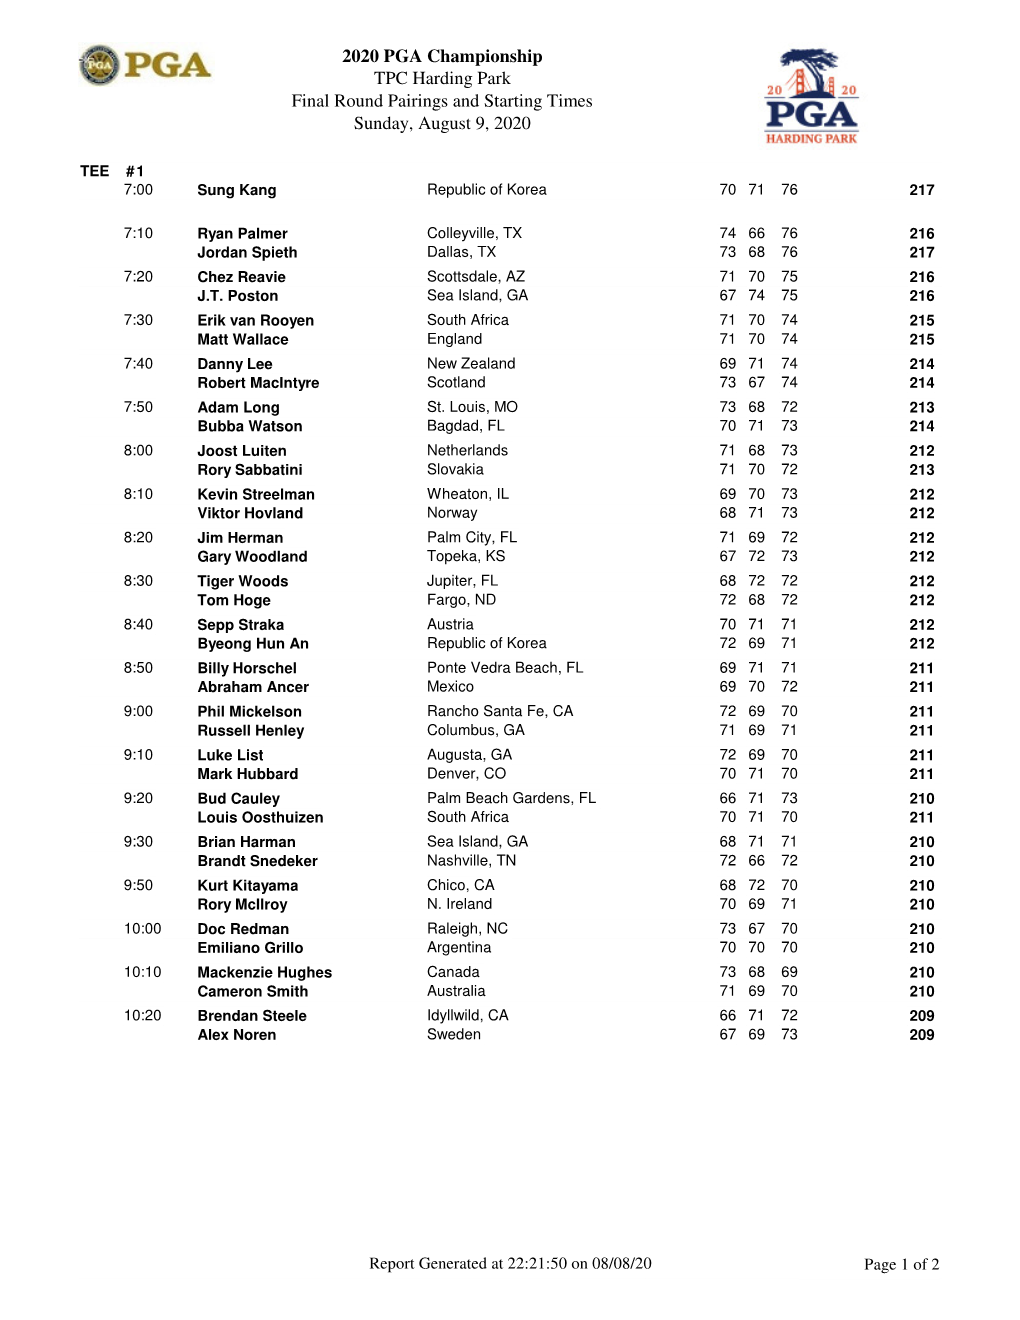 2020 PGA Championship TPC Harding Park Final Round Pairings and Starting Times Sunday, August 9, 2020